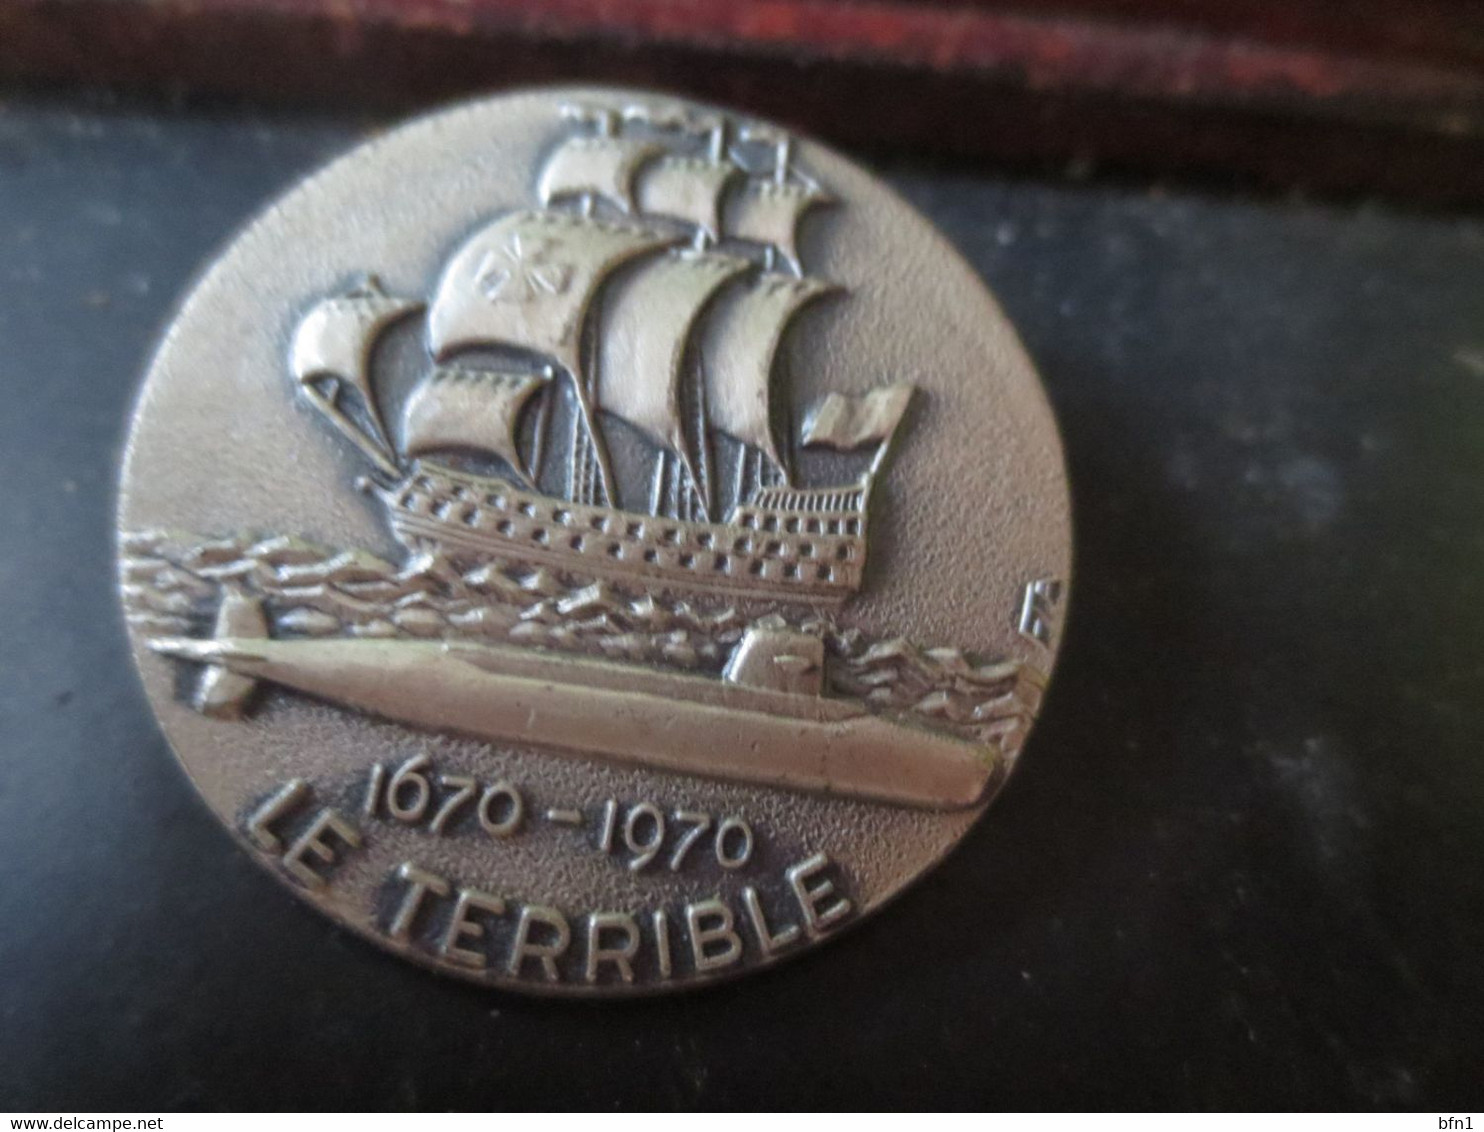 INSIGNE SOUS MARIN LE TERRIBLE 1670-1970 - Barcos